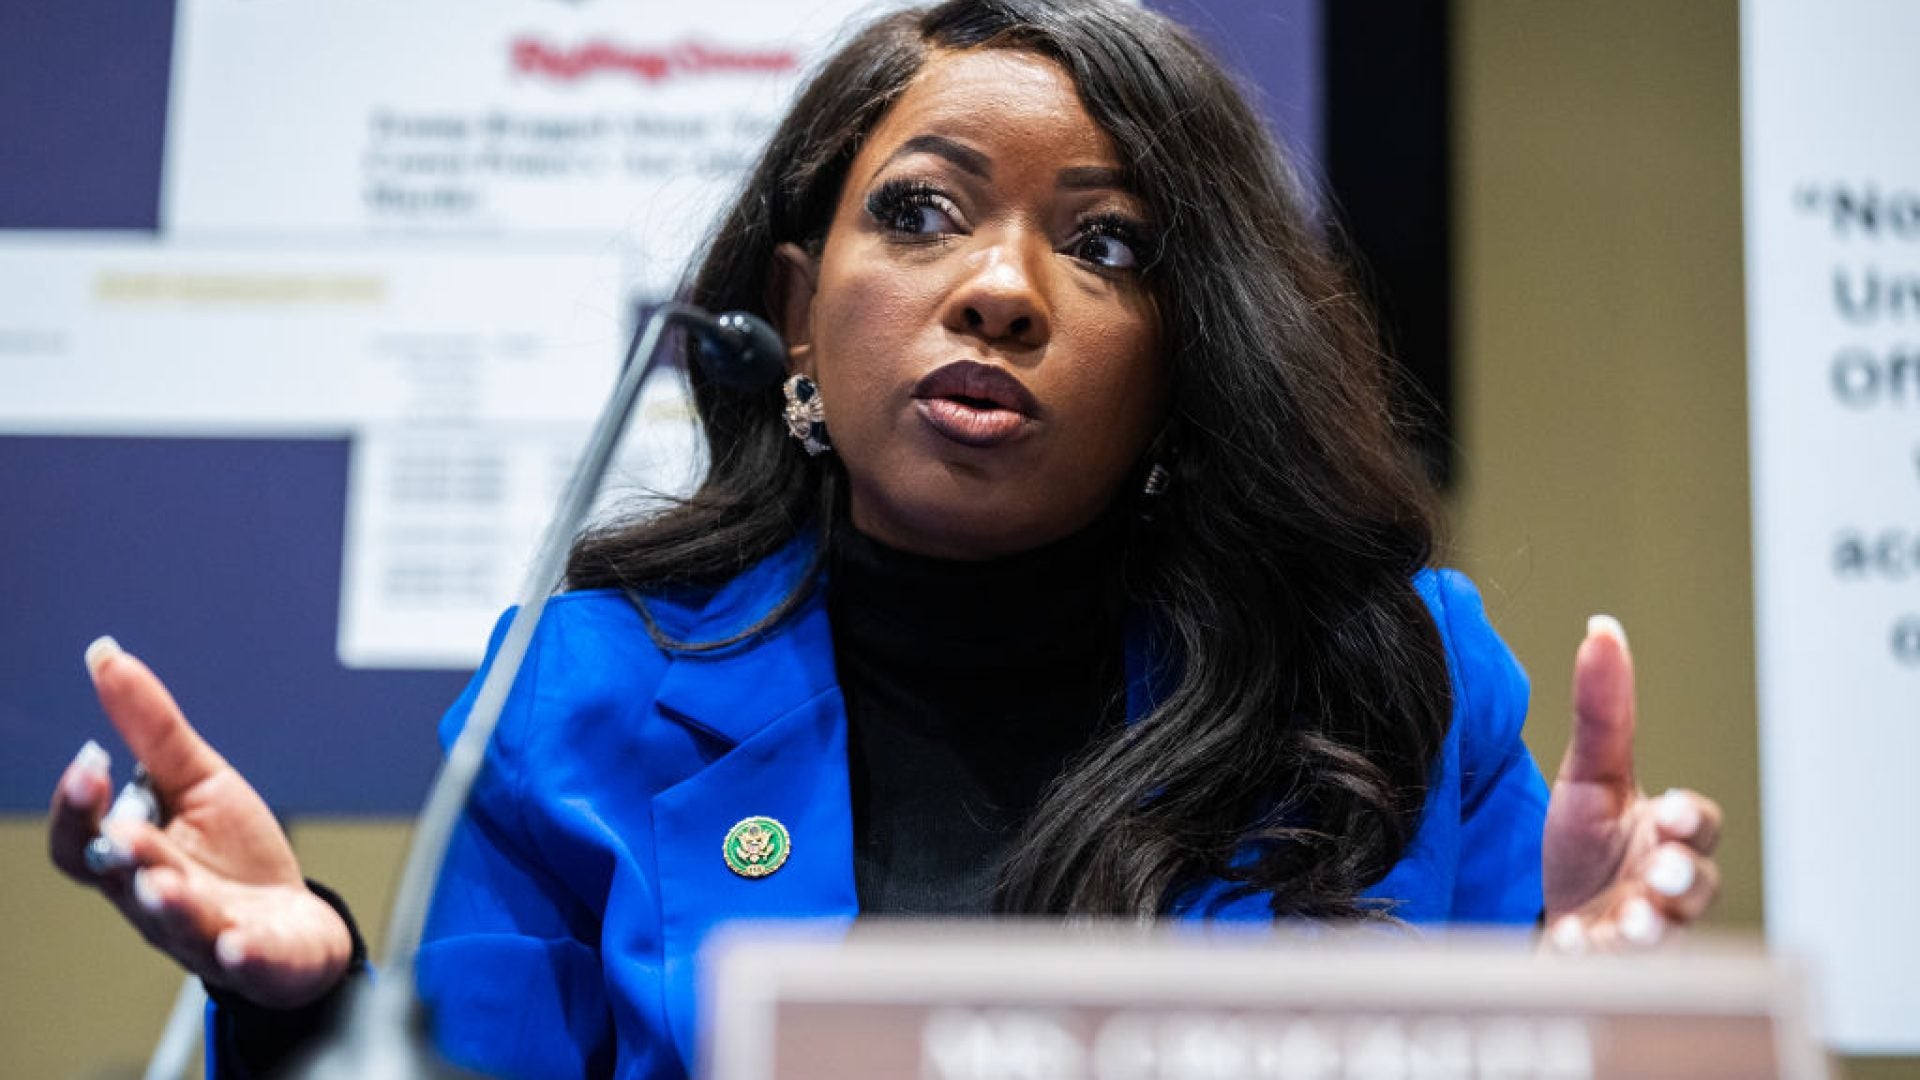 Rep. Jasmine Crockett Launches 'Clapback Collection' Merchandise After Heated Exchange At Congressional Hearing